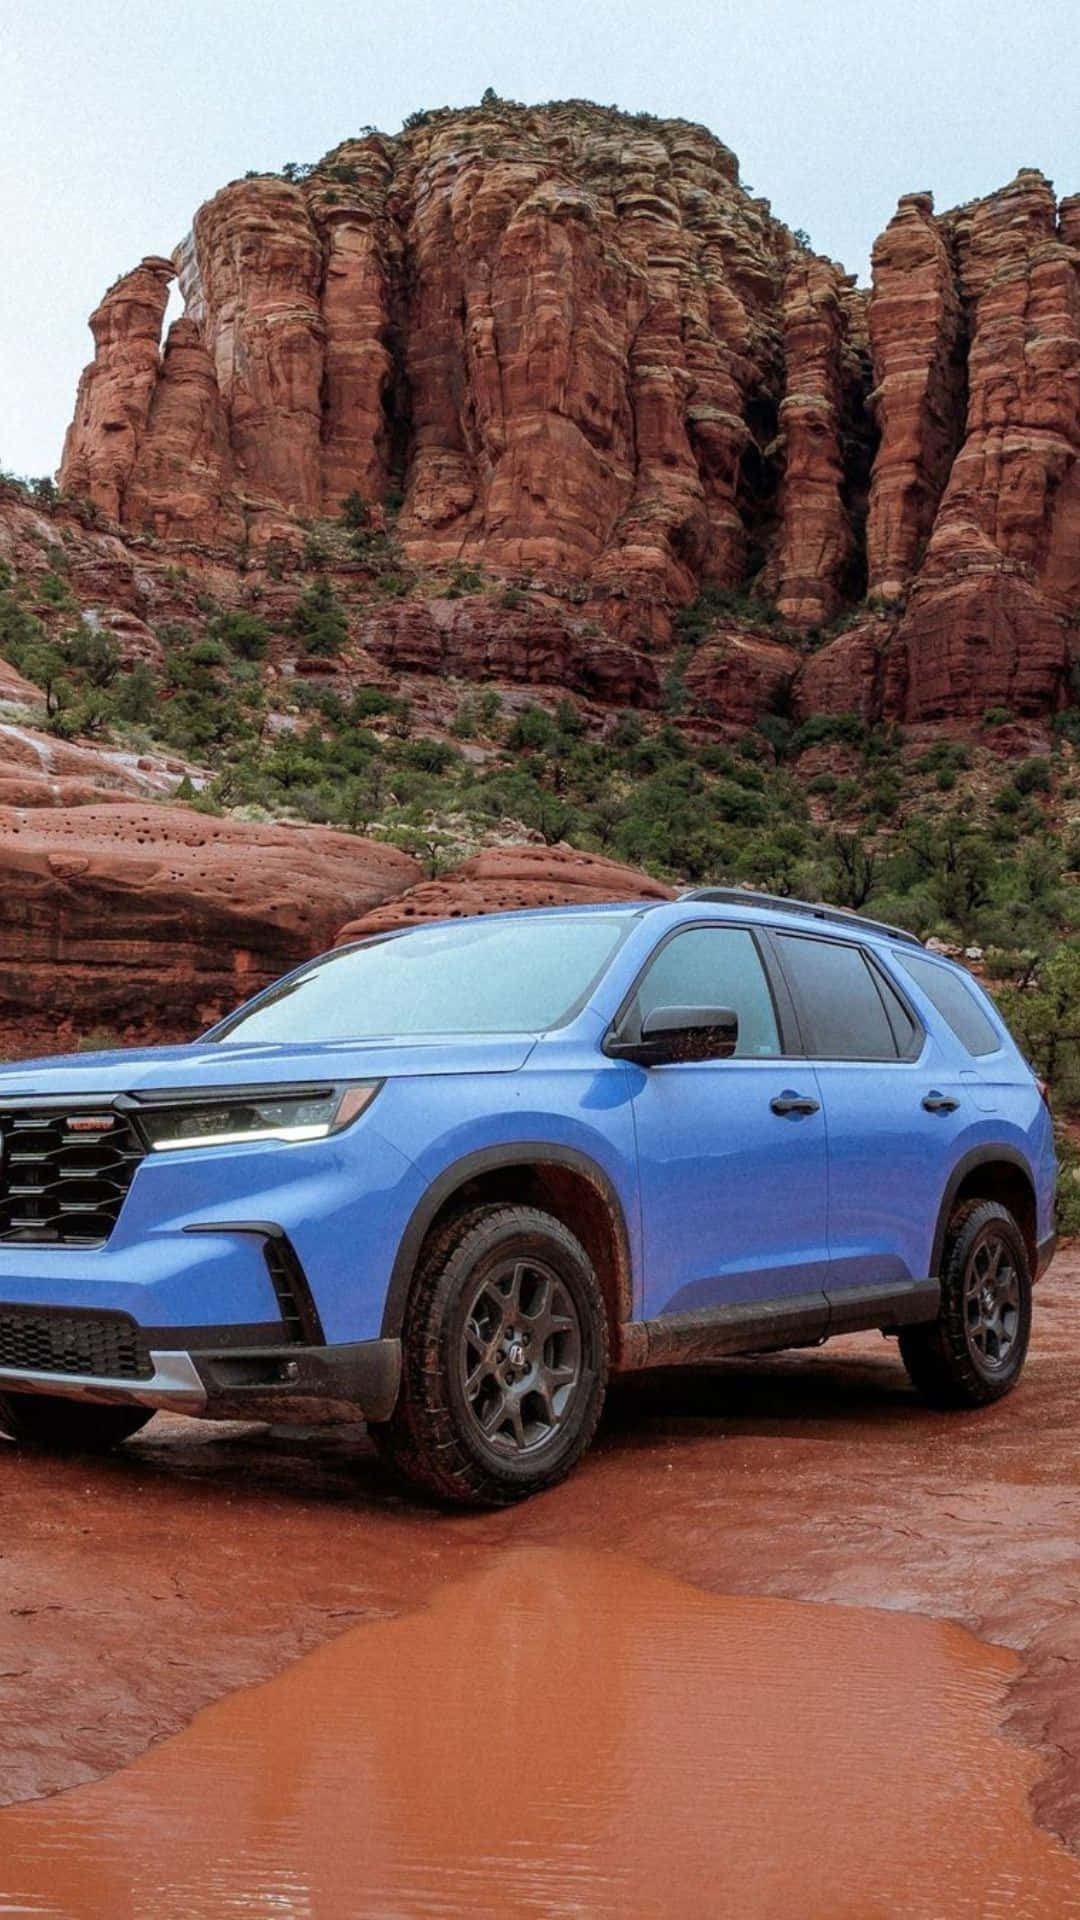 "See the future of driving with the 2023 Honda Pilot"